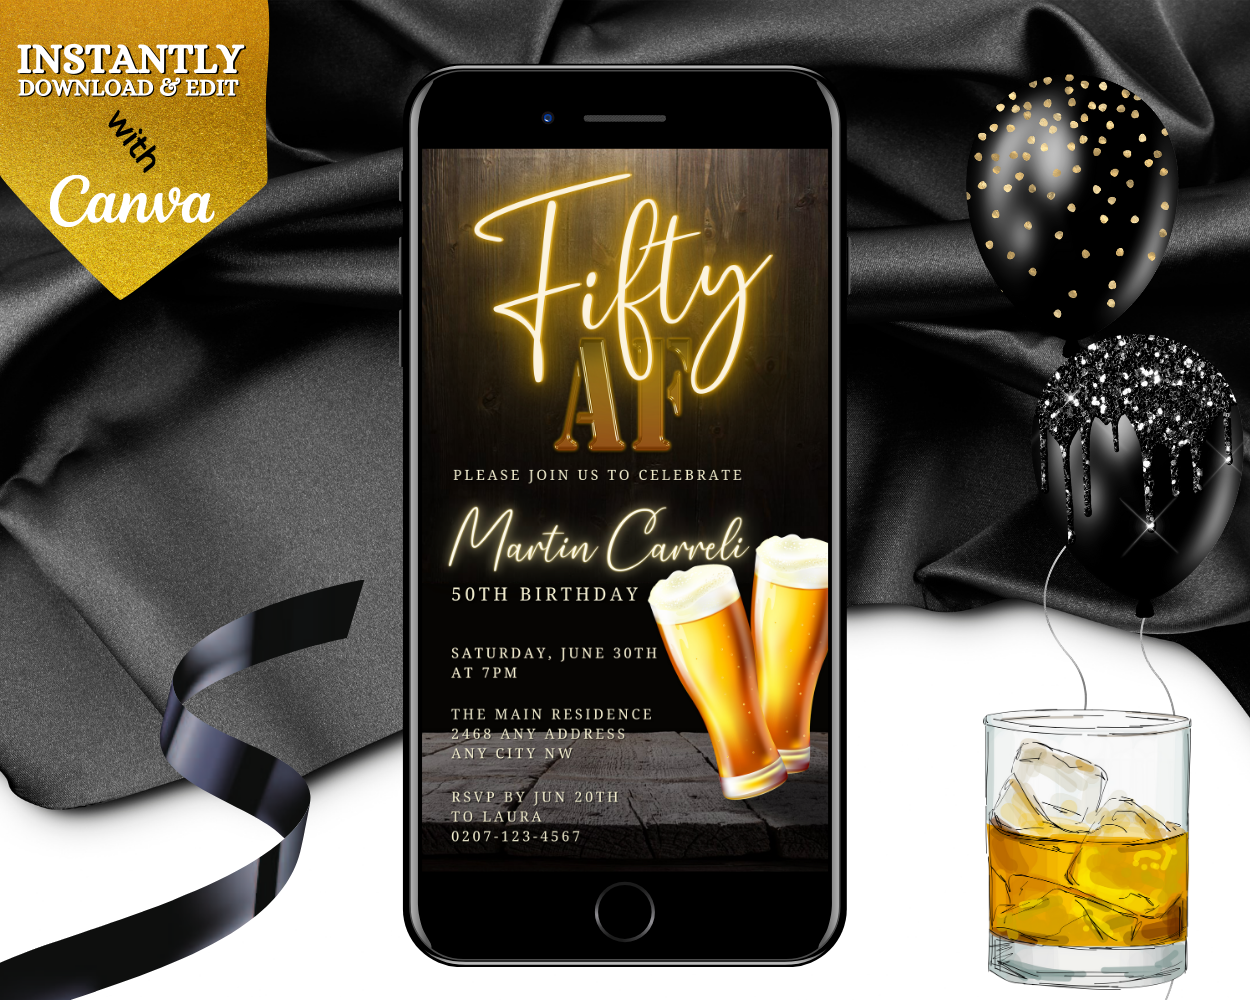 Customizable Black Gold Neon Beer Birthday Evite displayed on a smartphone next to drinks and balloons, ready for personalizing and sharing digitally.